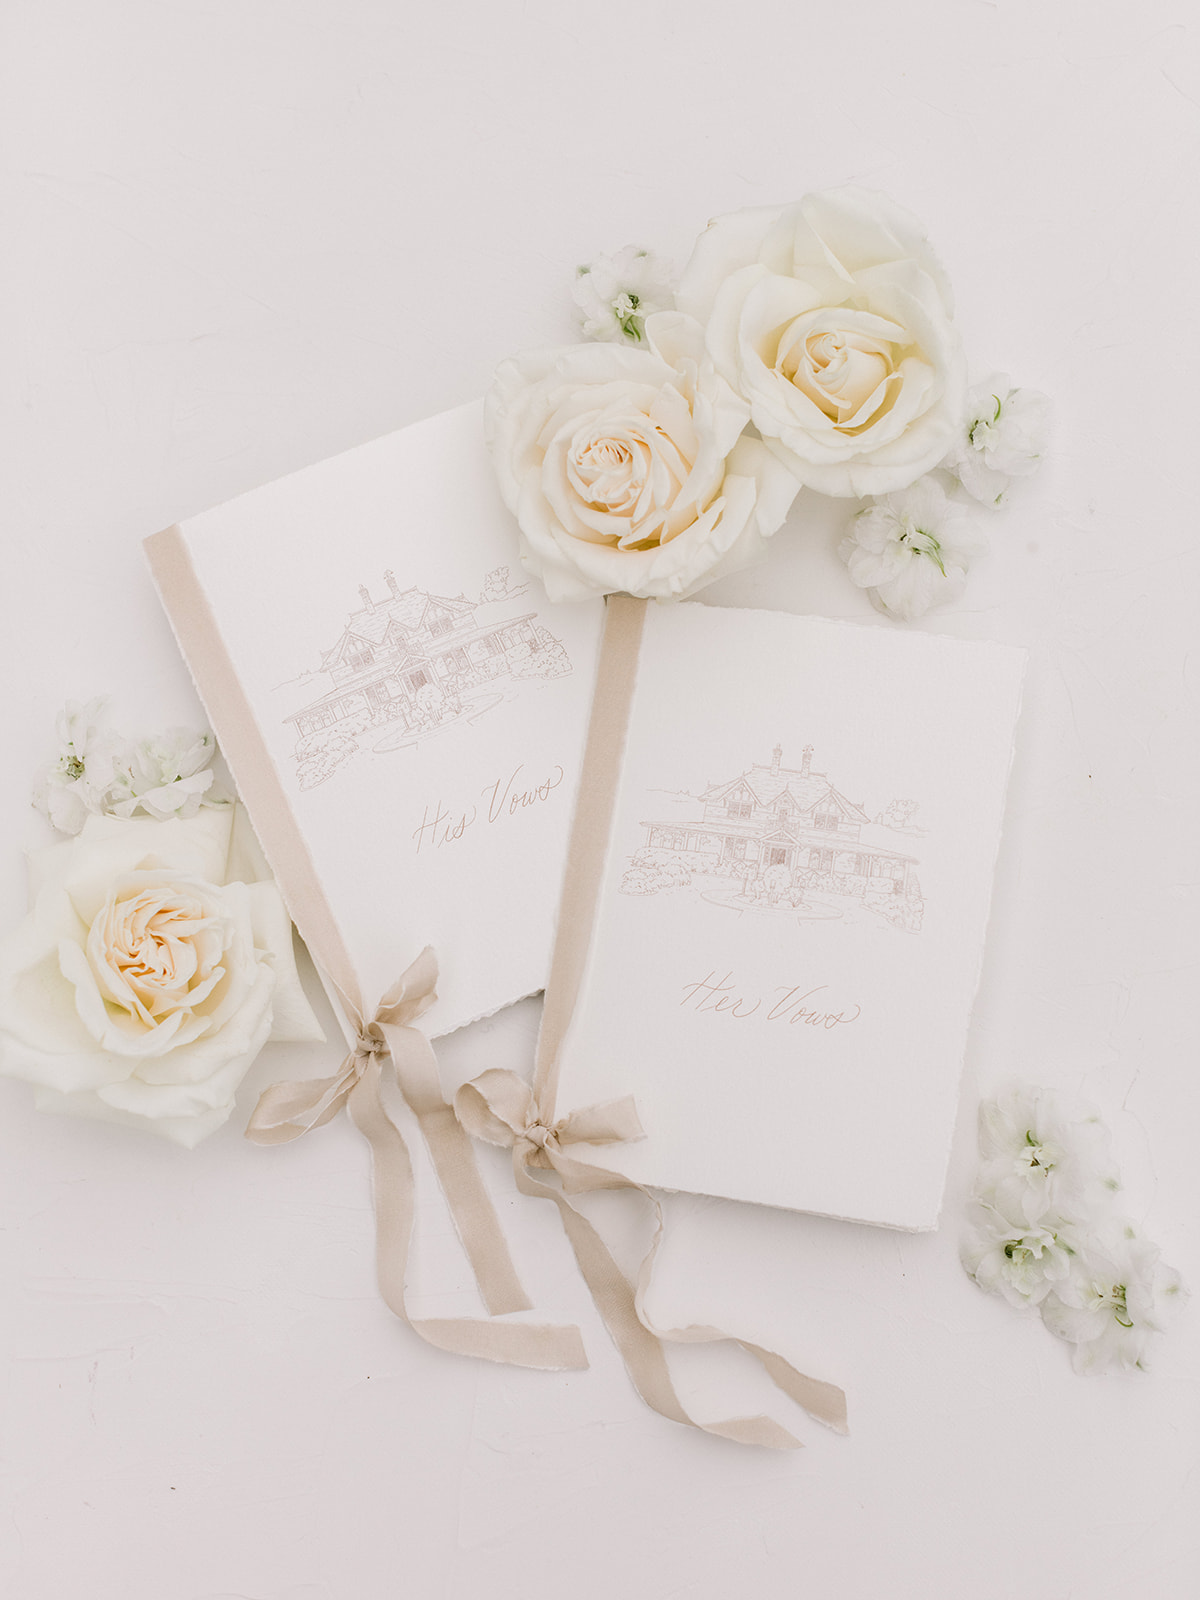 Vintage Inspired Cream and Light Blue Wedding Stationery Inspiration Photographed by Nicole Sarah Photography